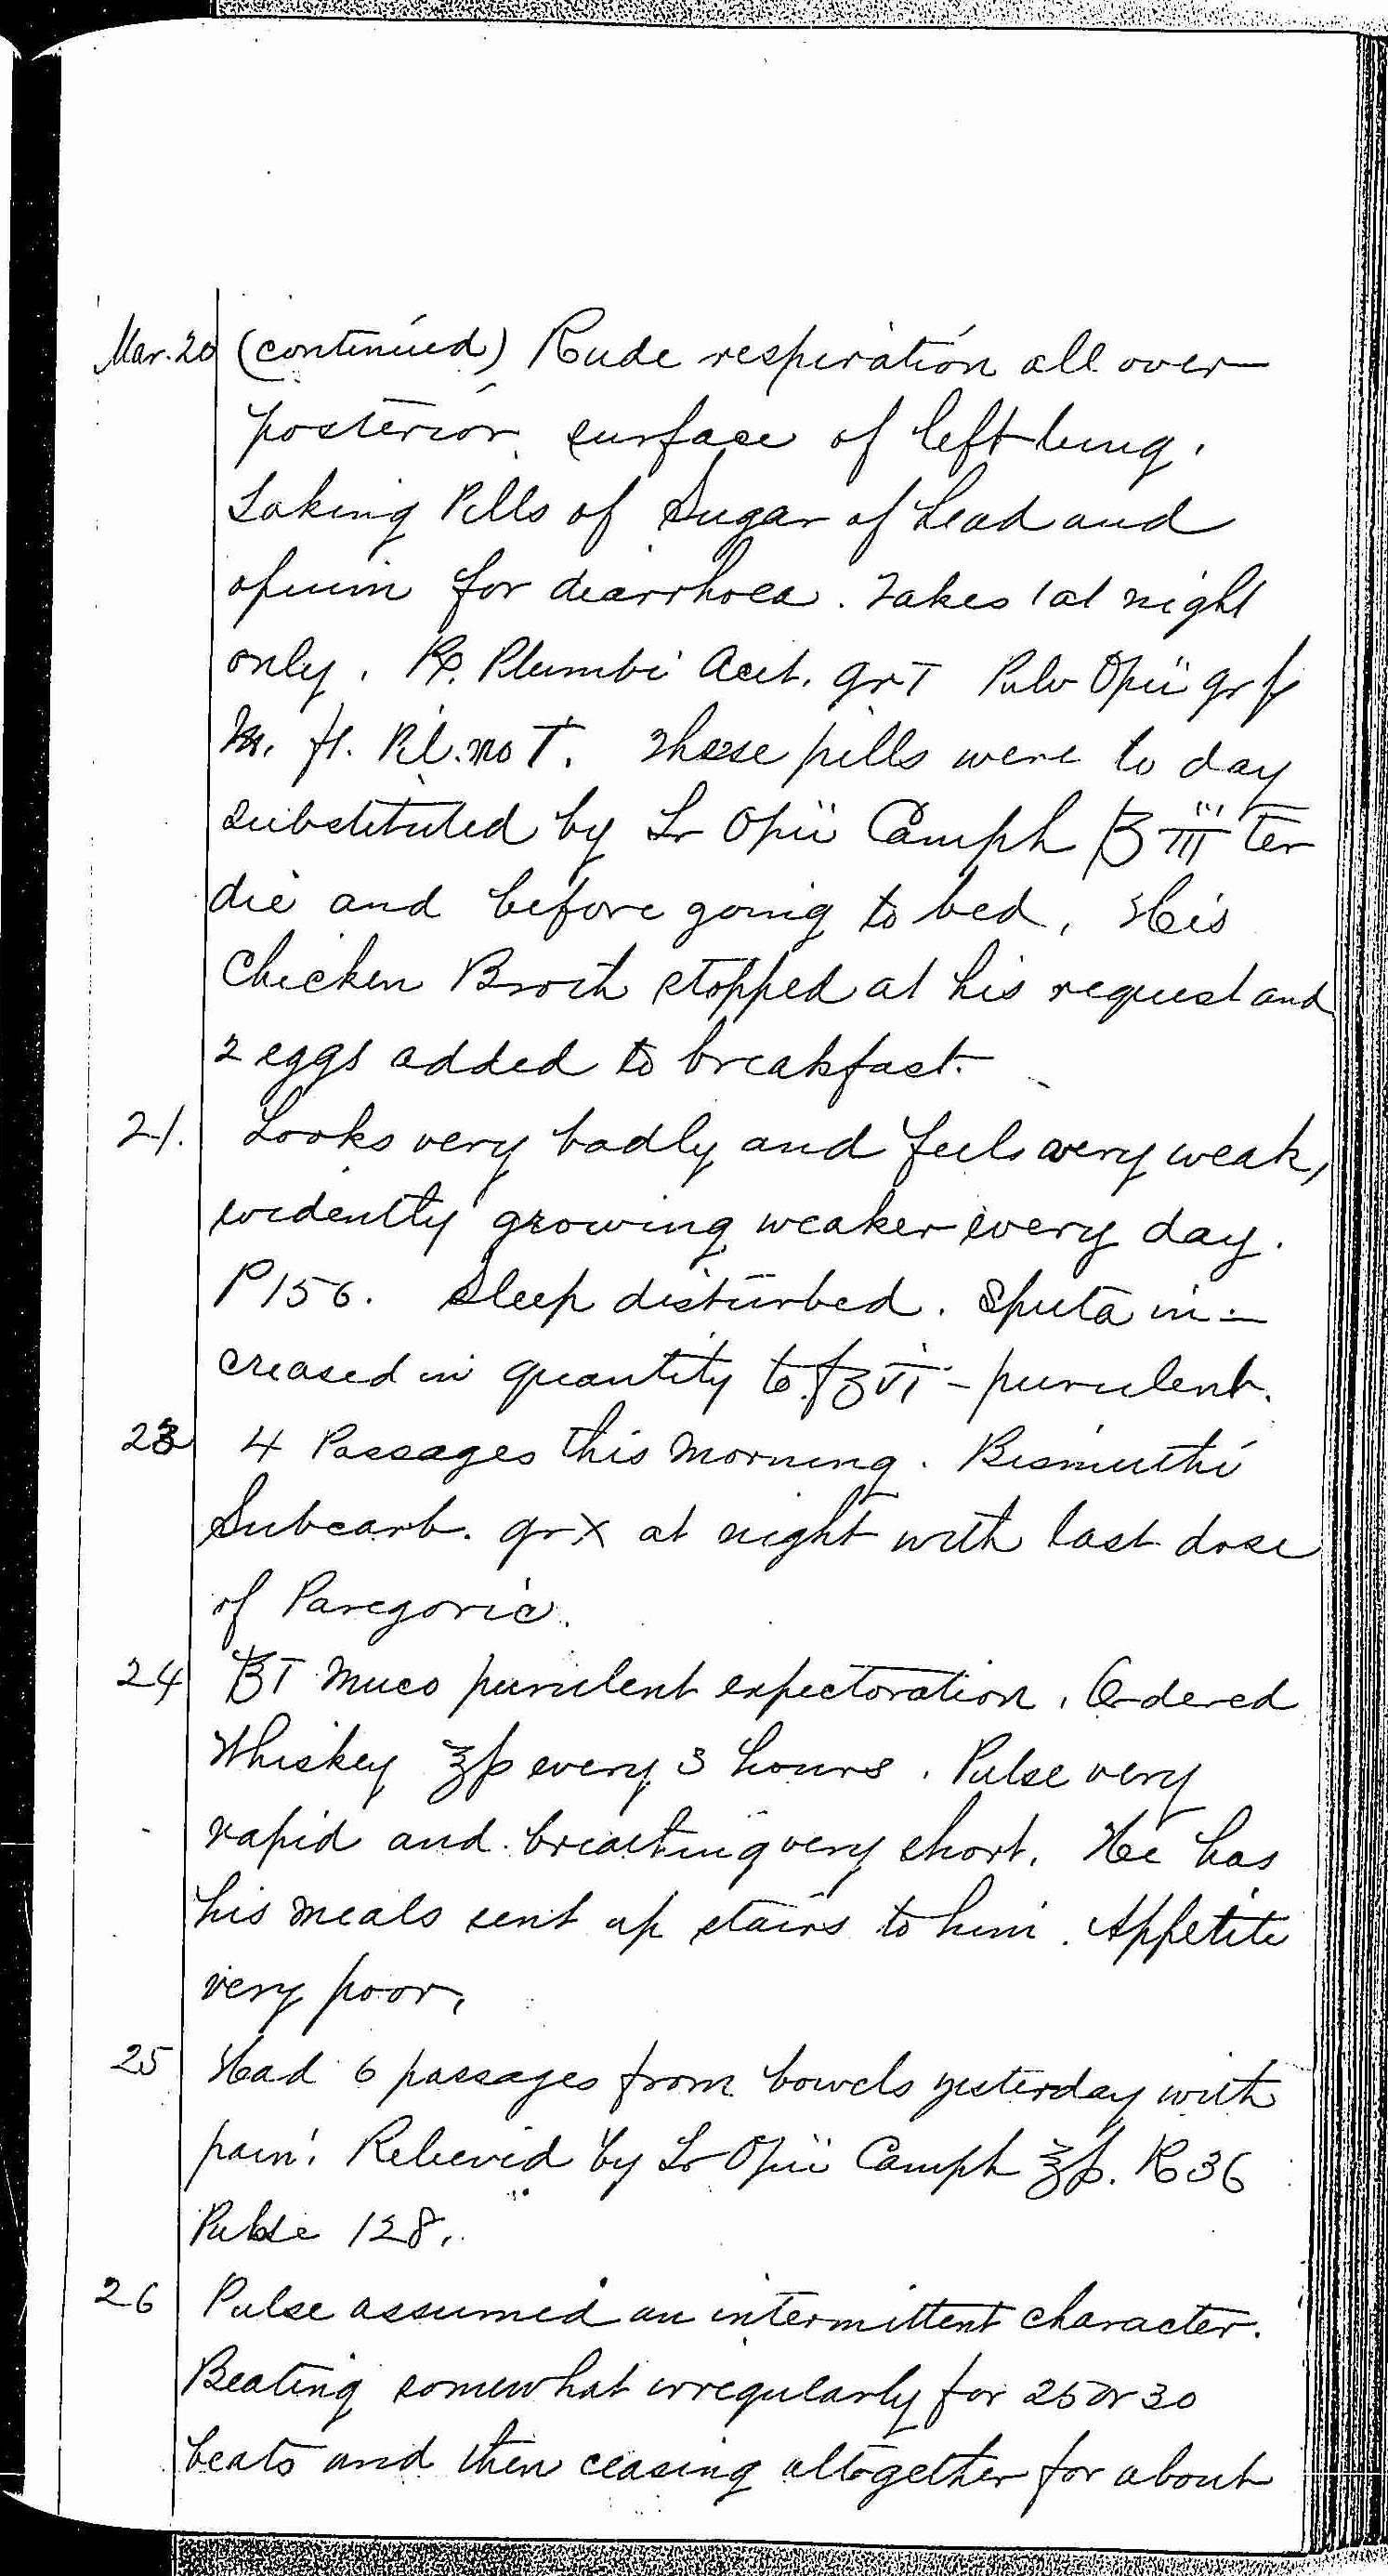 Entry for William Bathwell (page 11 of 13) in the log Hospital Tickets and Case Papers - Naval Hospital - Washington, D.C. - 1868-69